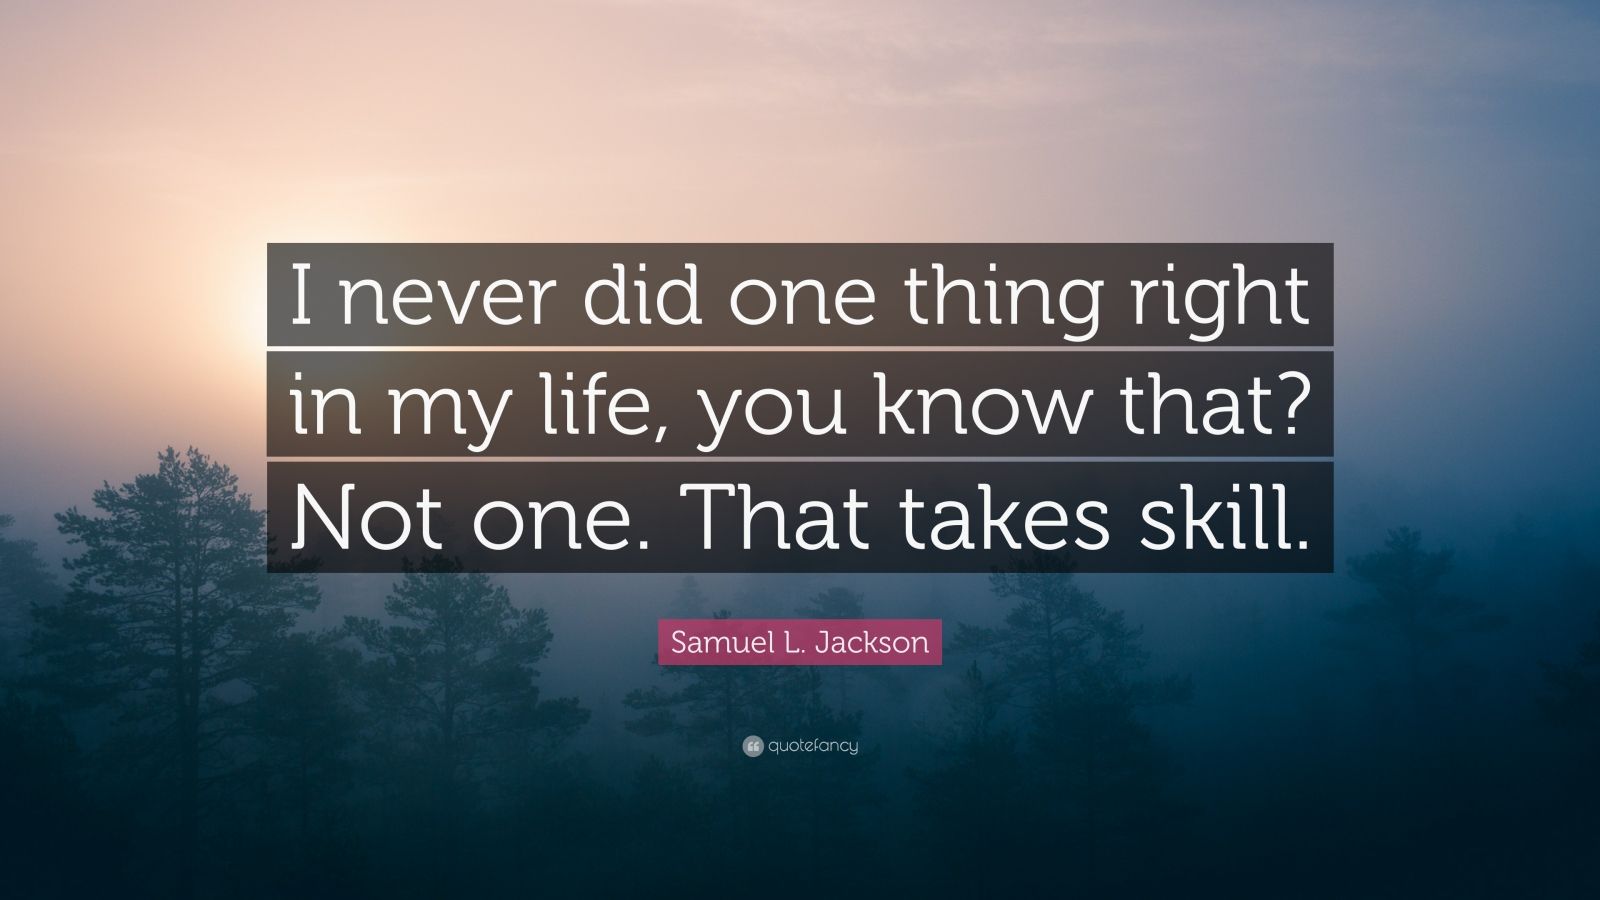 Samuel L. Jackson Quote: “I never did one thing right in my life, you